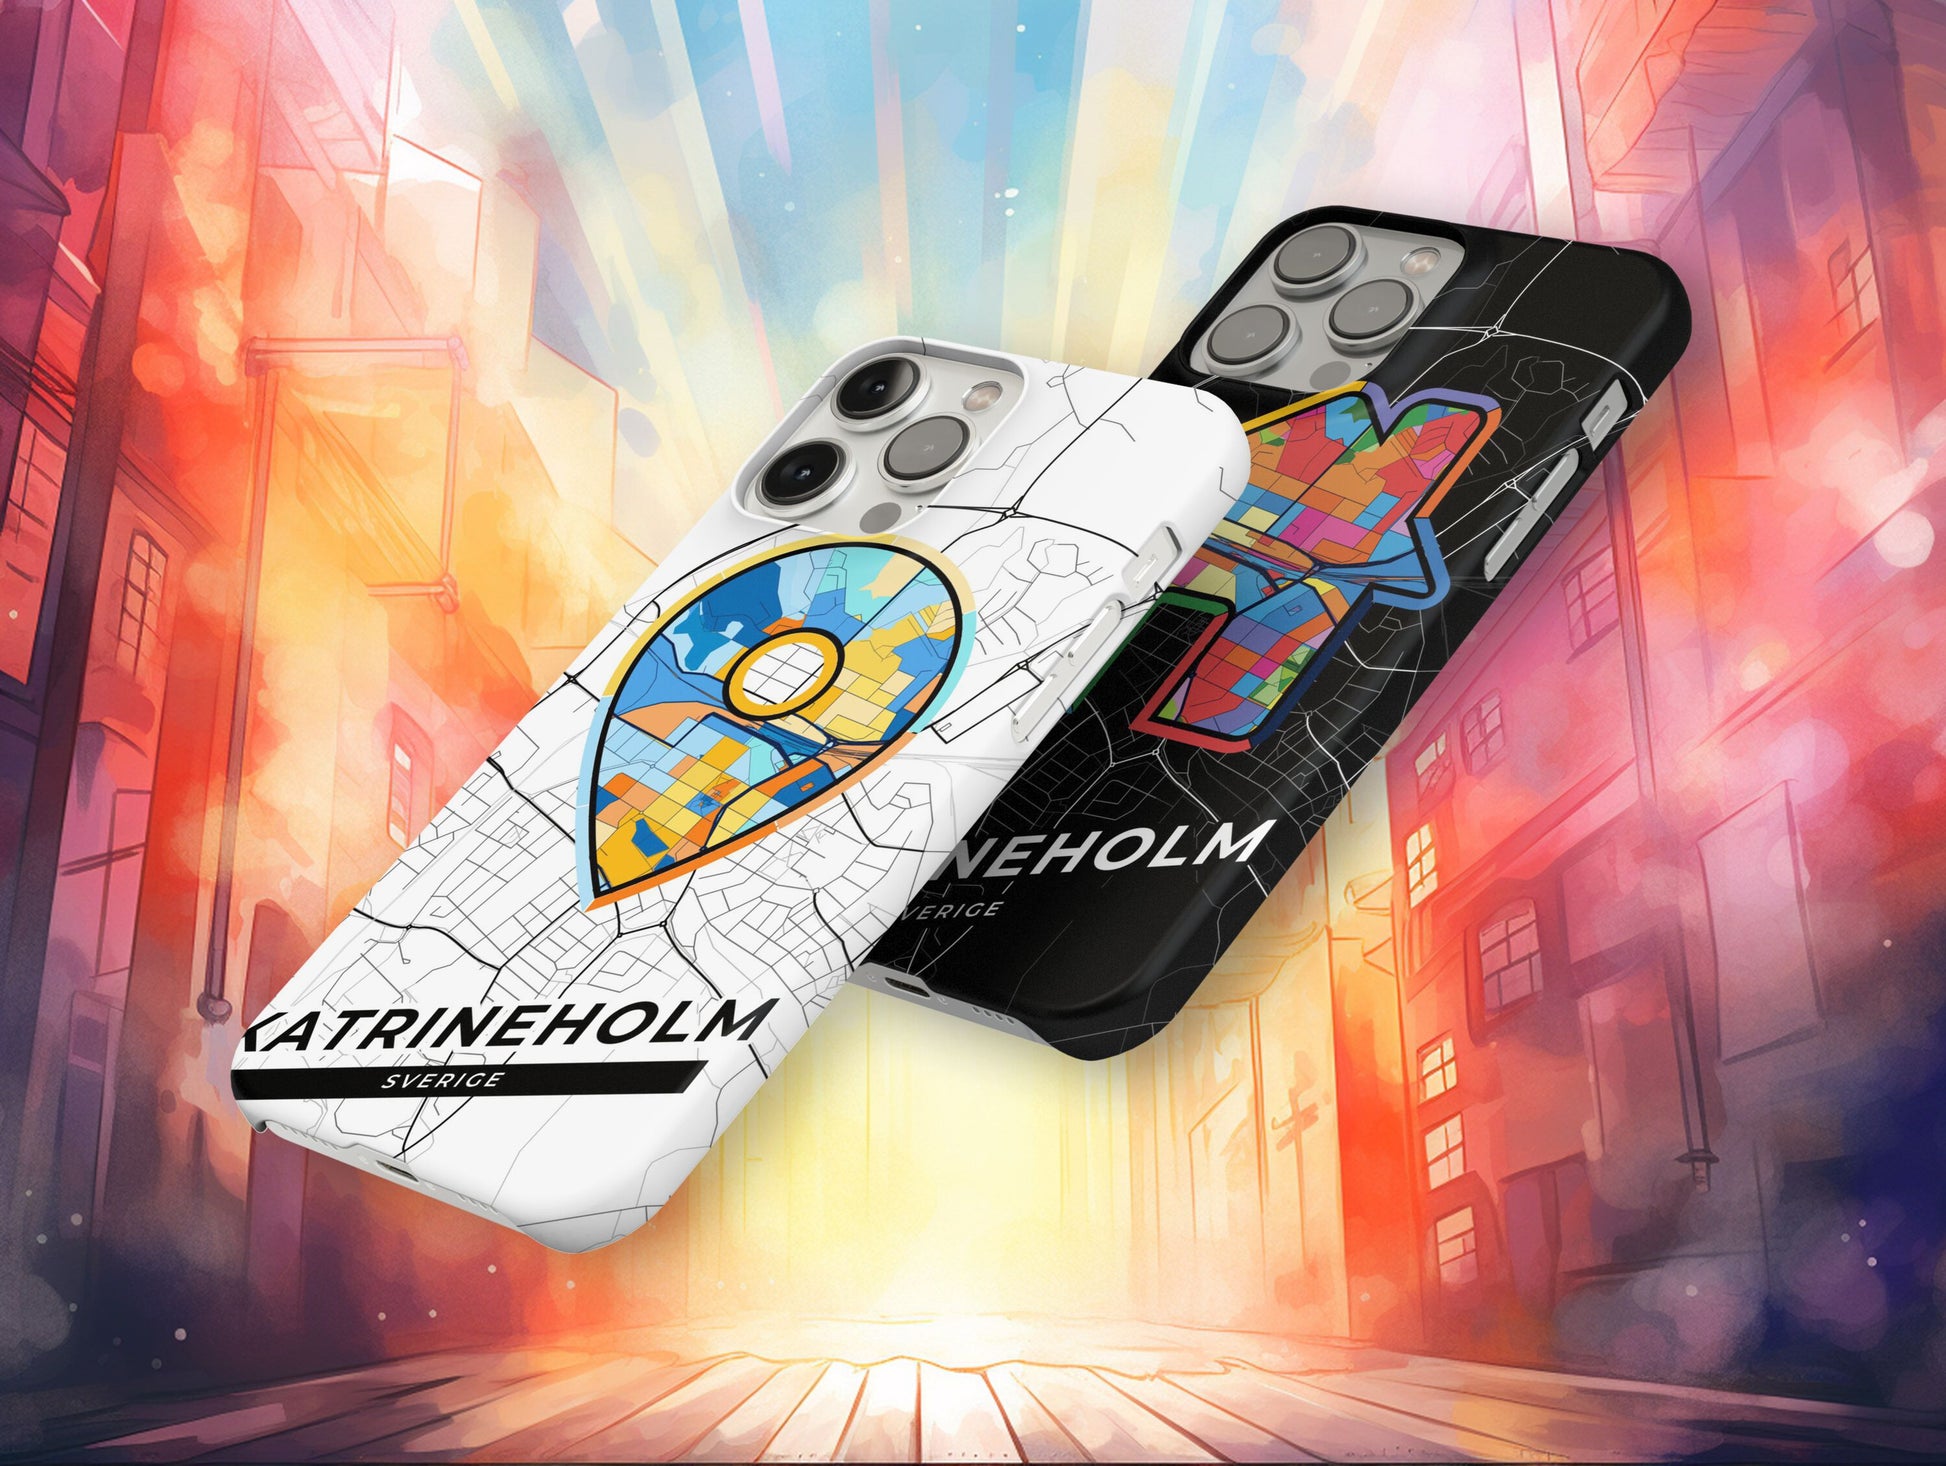 Katrineholm Sweden slim phone case with colorful icon. Birthday, wedding or housewarming gift. Couple match cases.